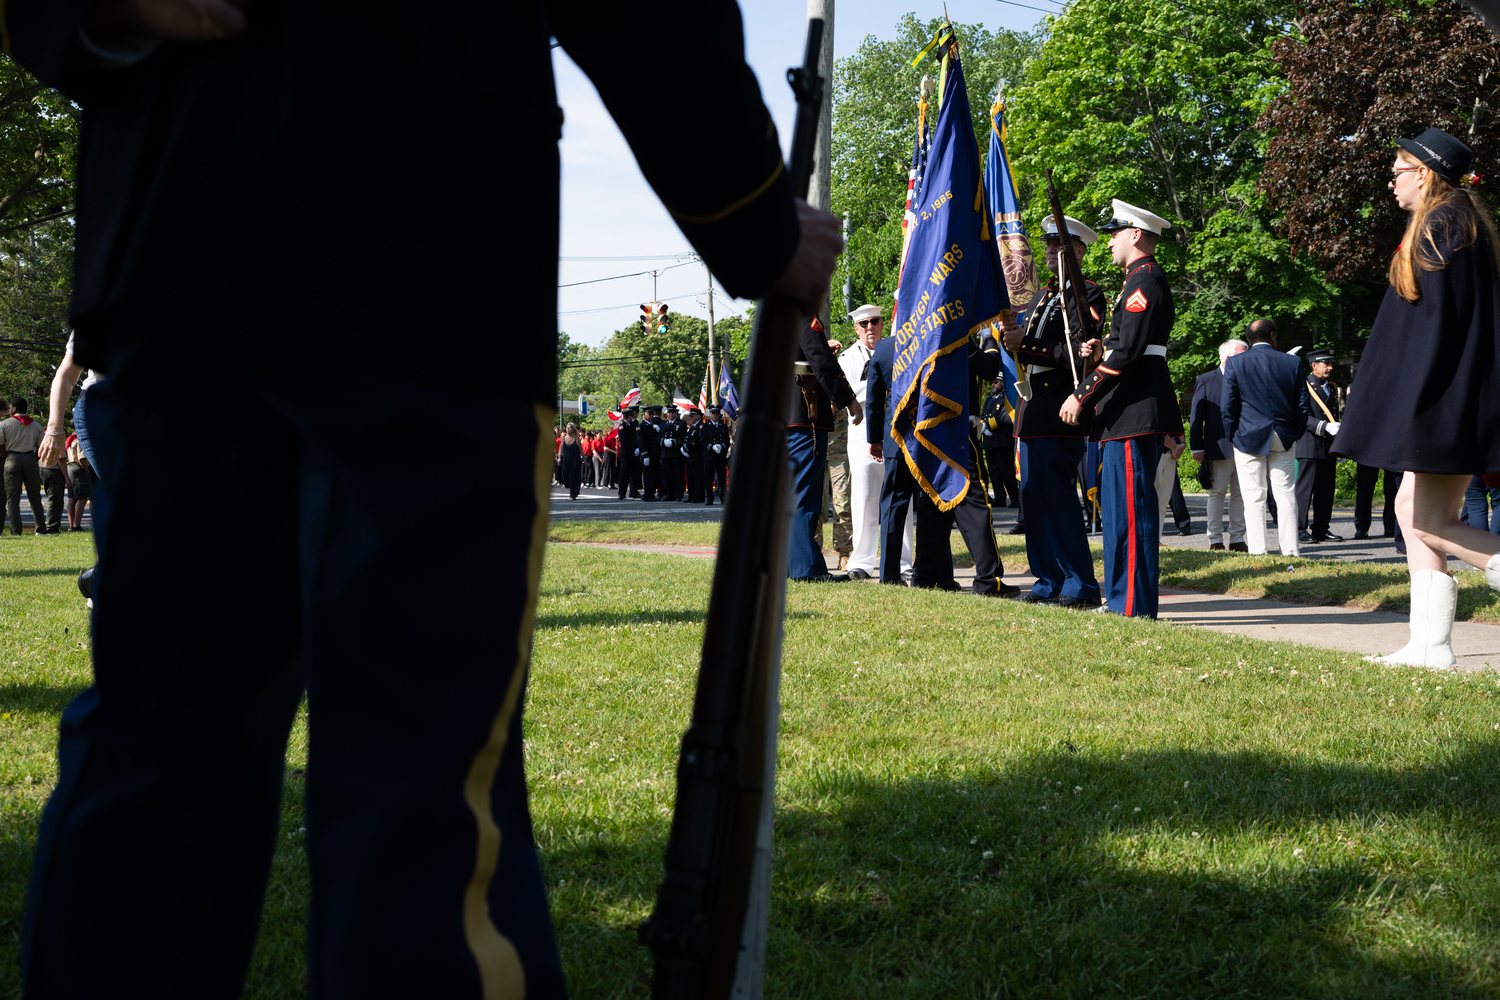 The color guard before the start of the Sag Harbor Memorial Day parade. LORI HAWKINS